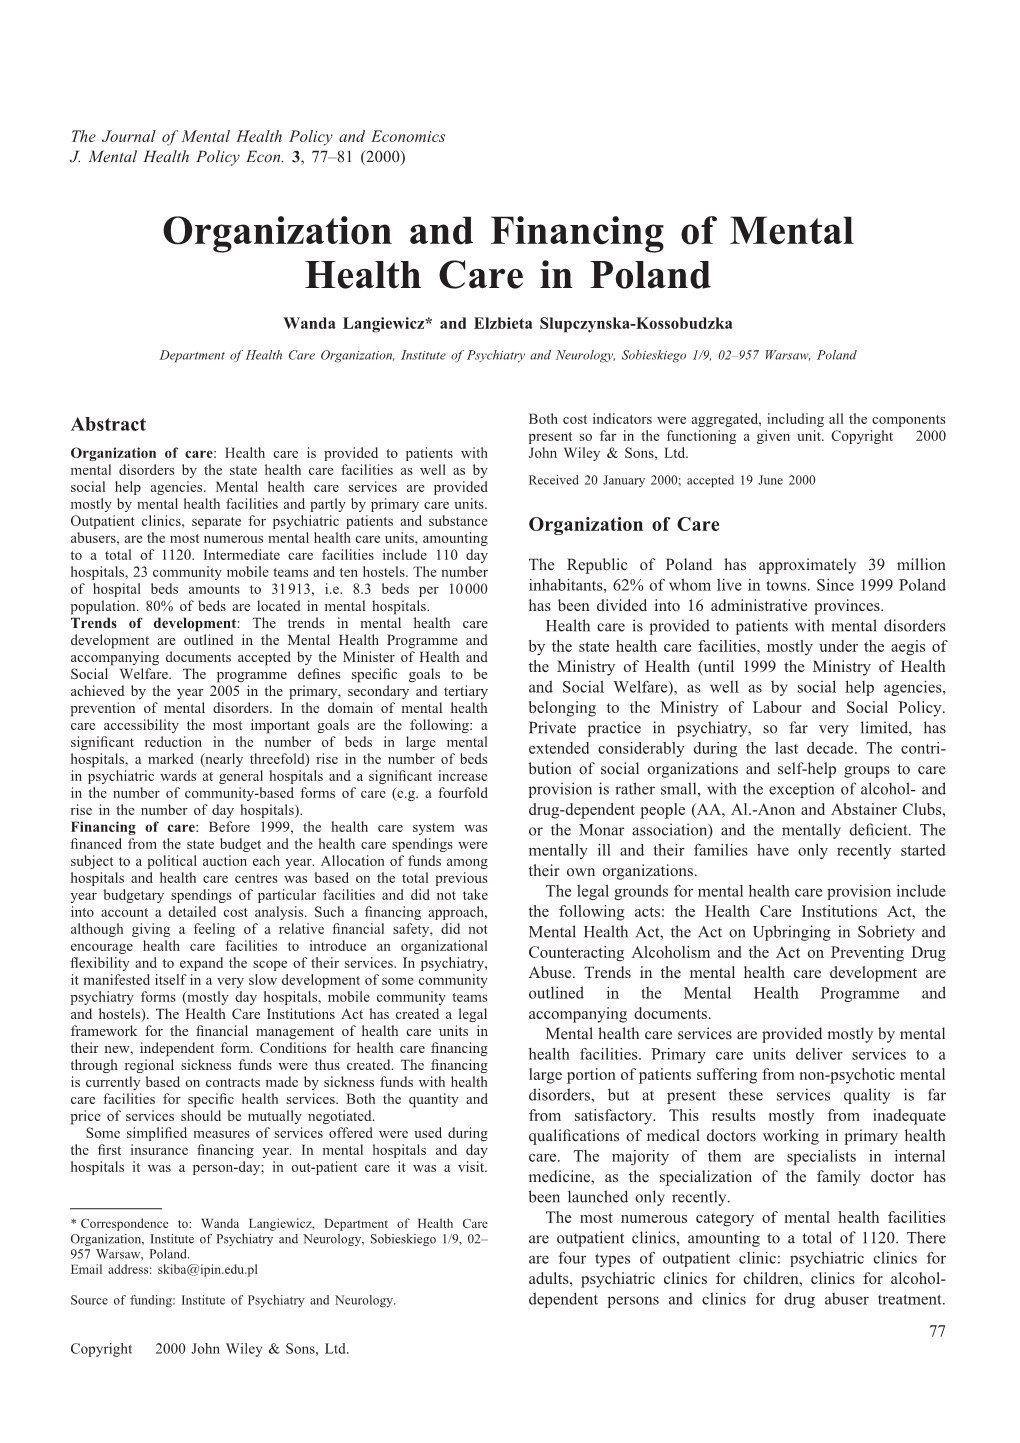 Organization and Financing of Mental Health Care in Poland